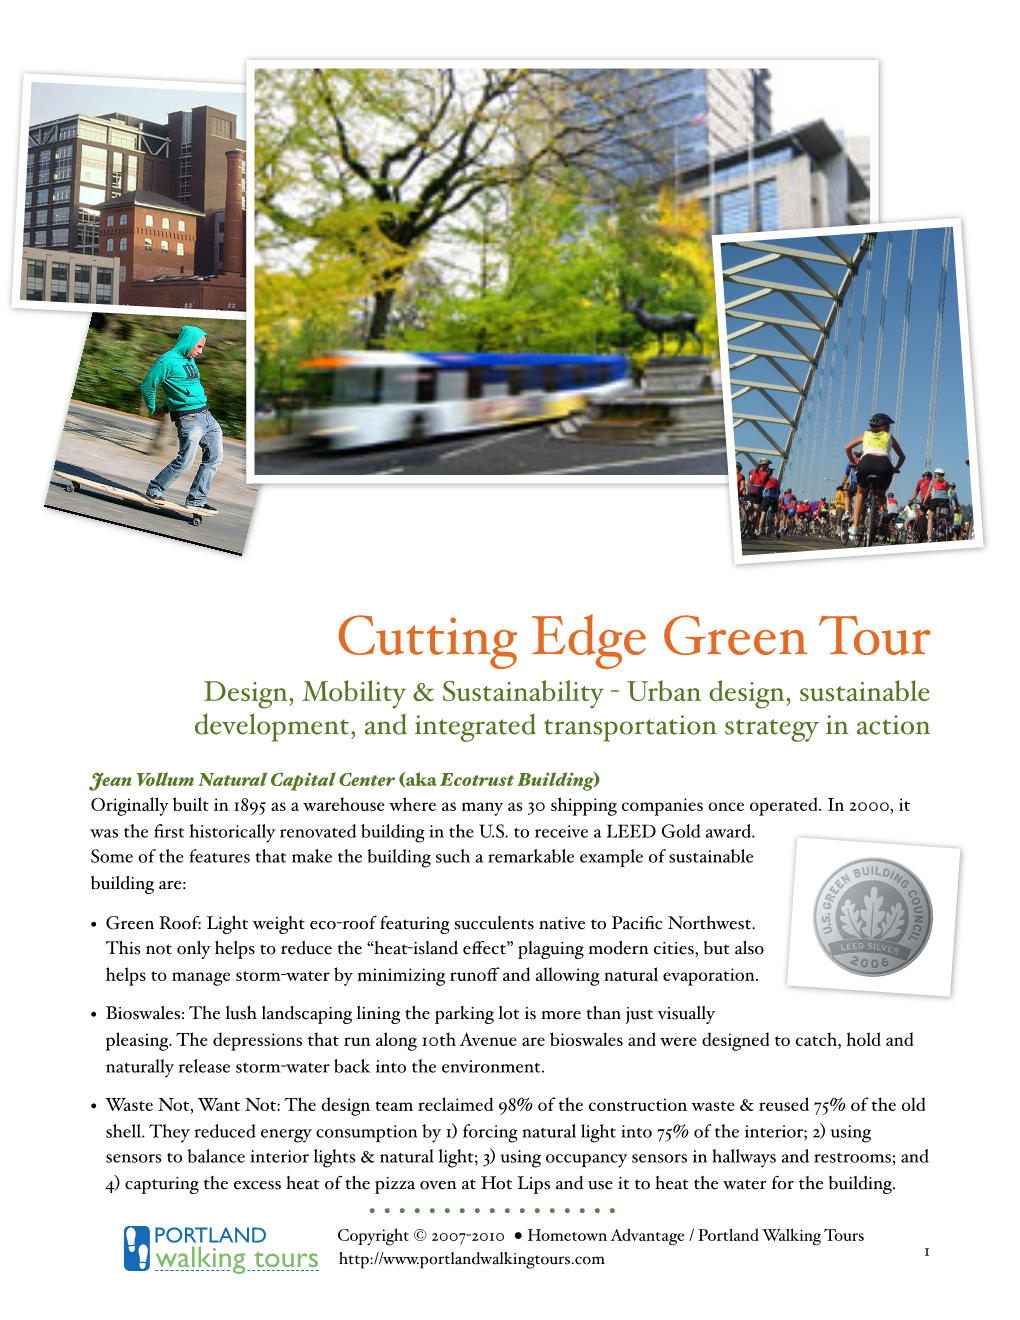 Cutting Edge Green Tour Design, Mobility & Sustainability - Urban Design, Sustainable Development, and Integrated Transportation Strategy in Action